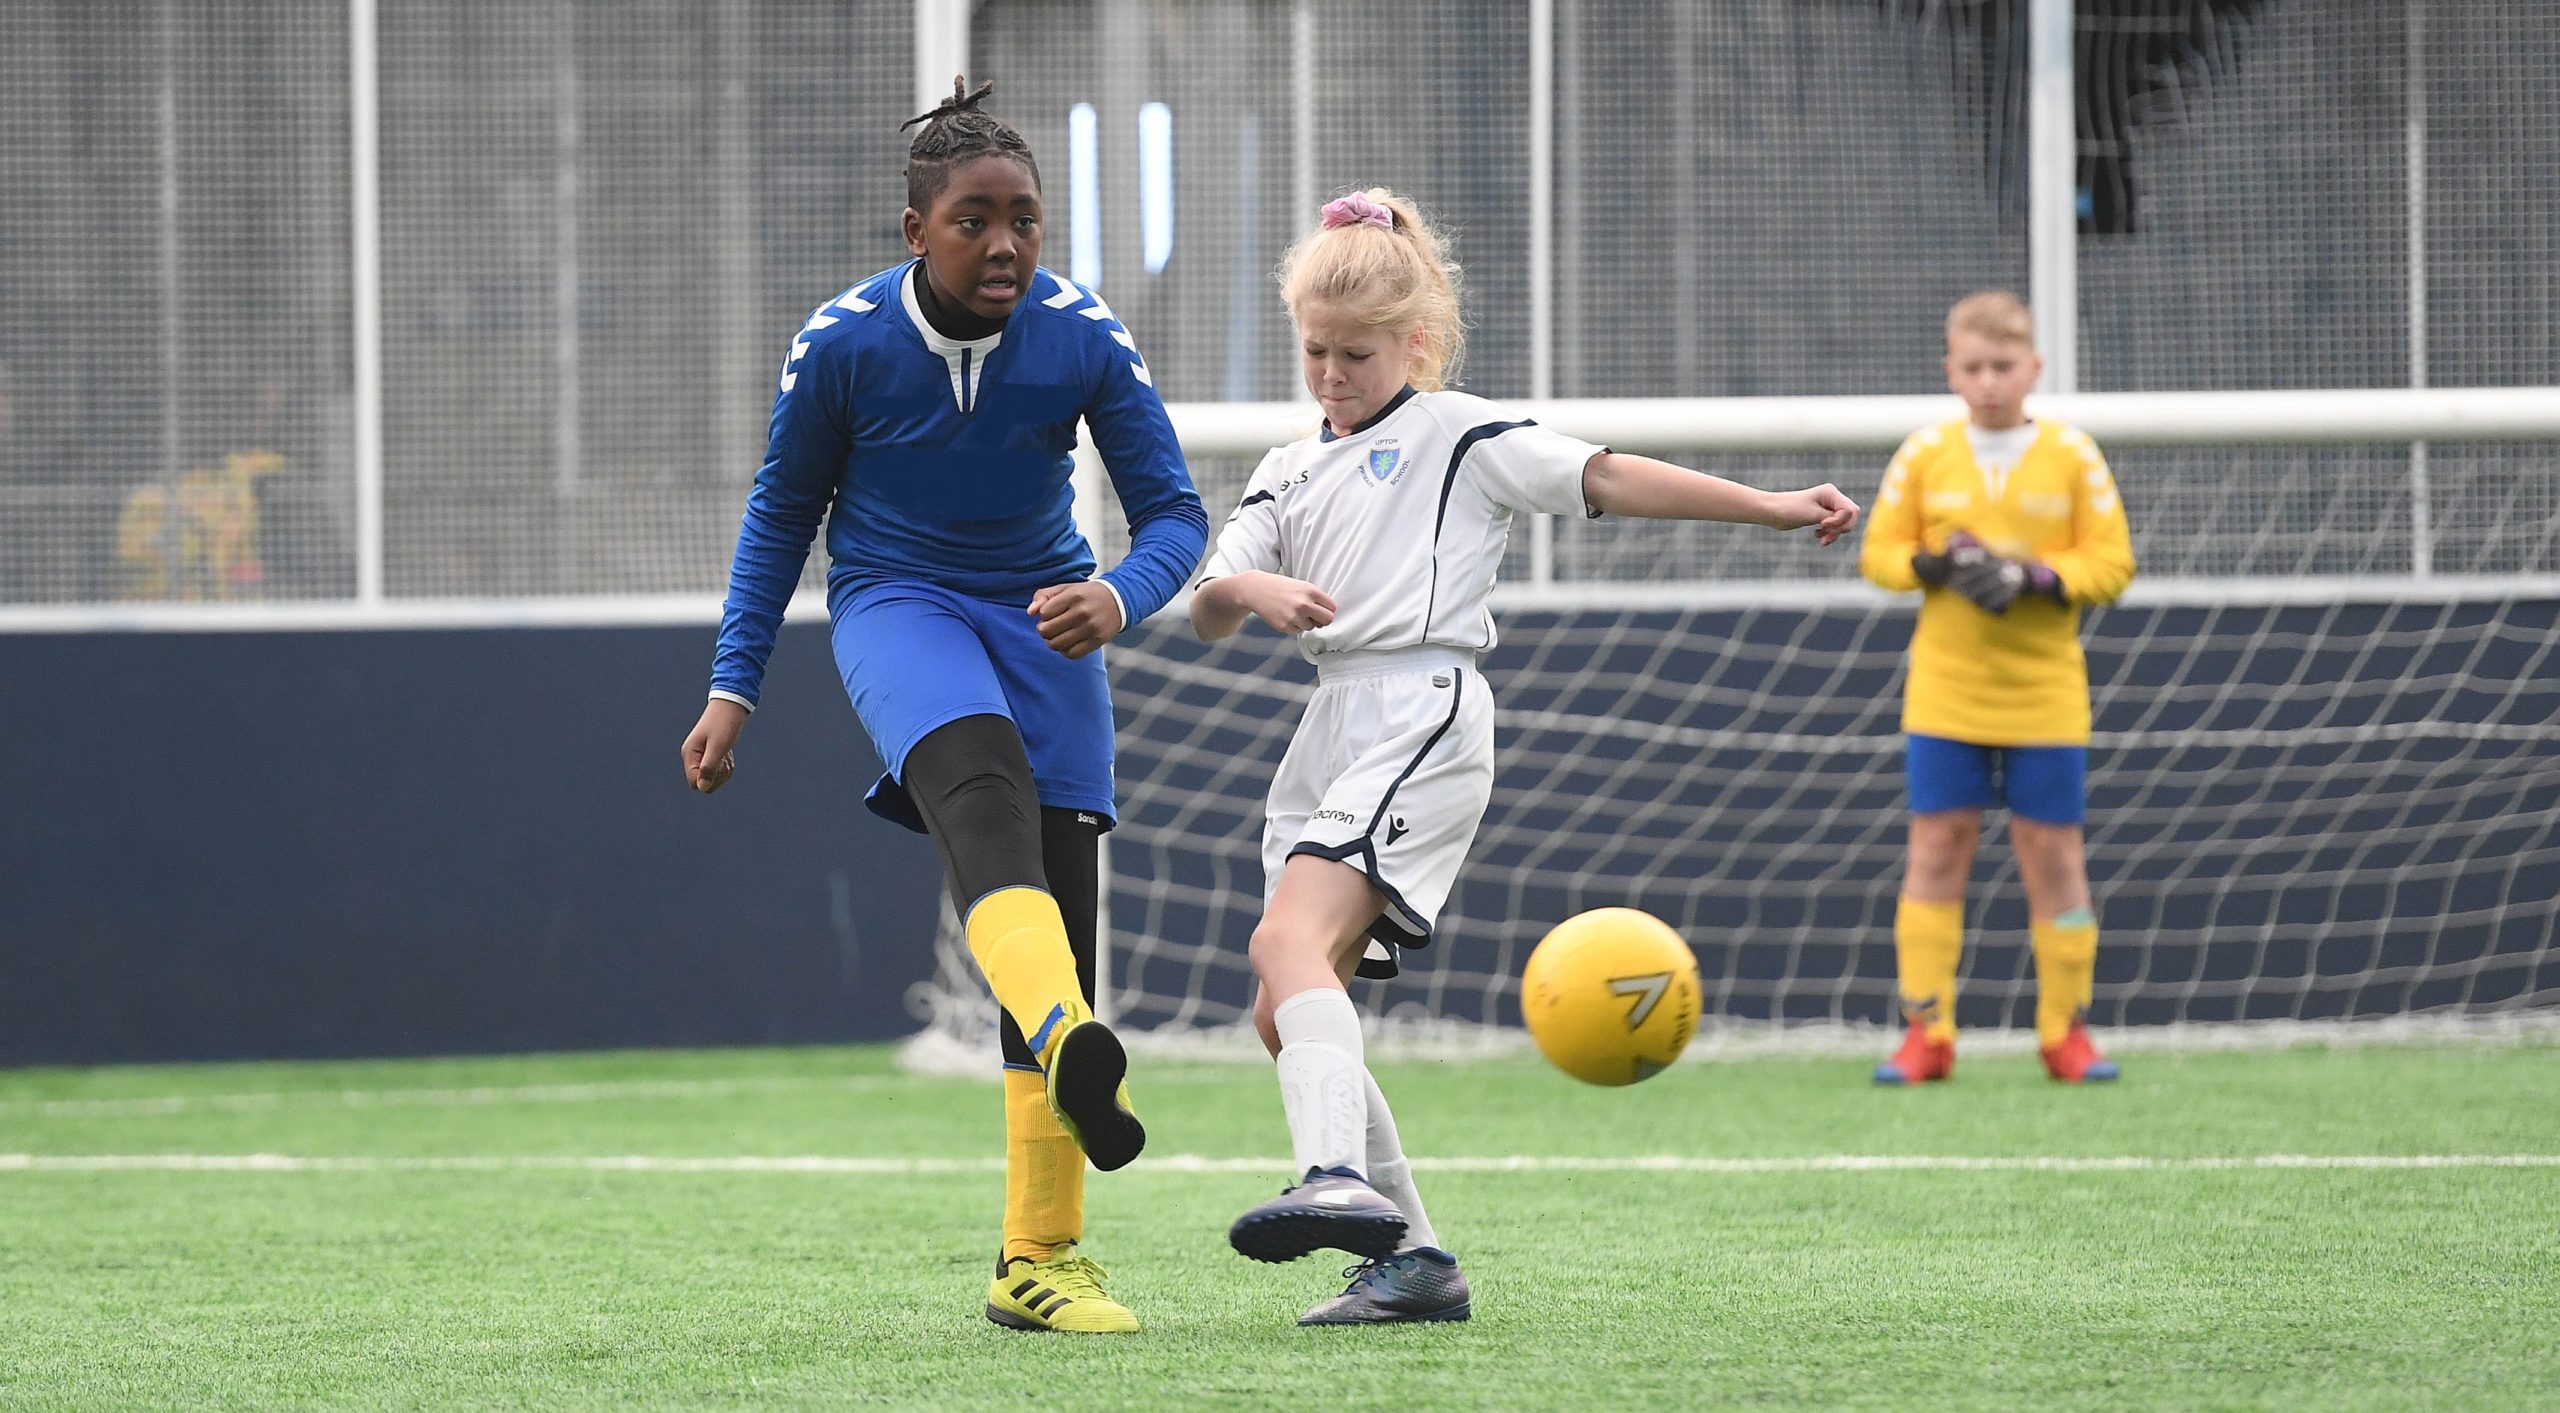 Bright Future for female football at Millwall